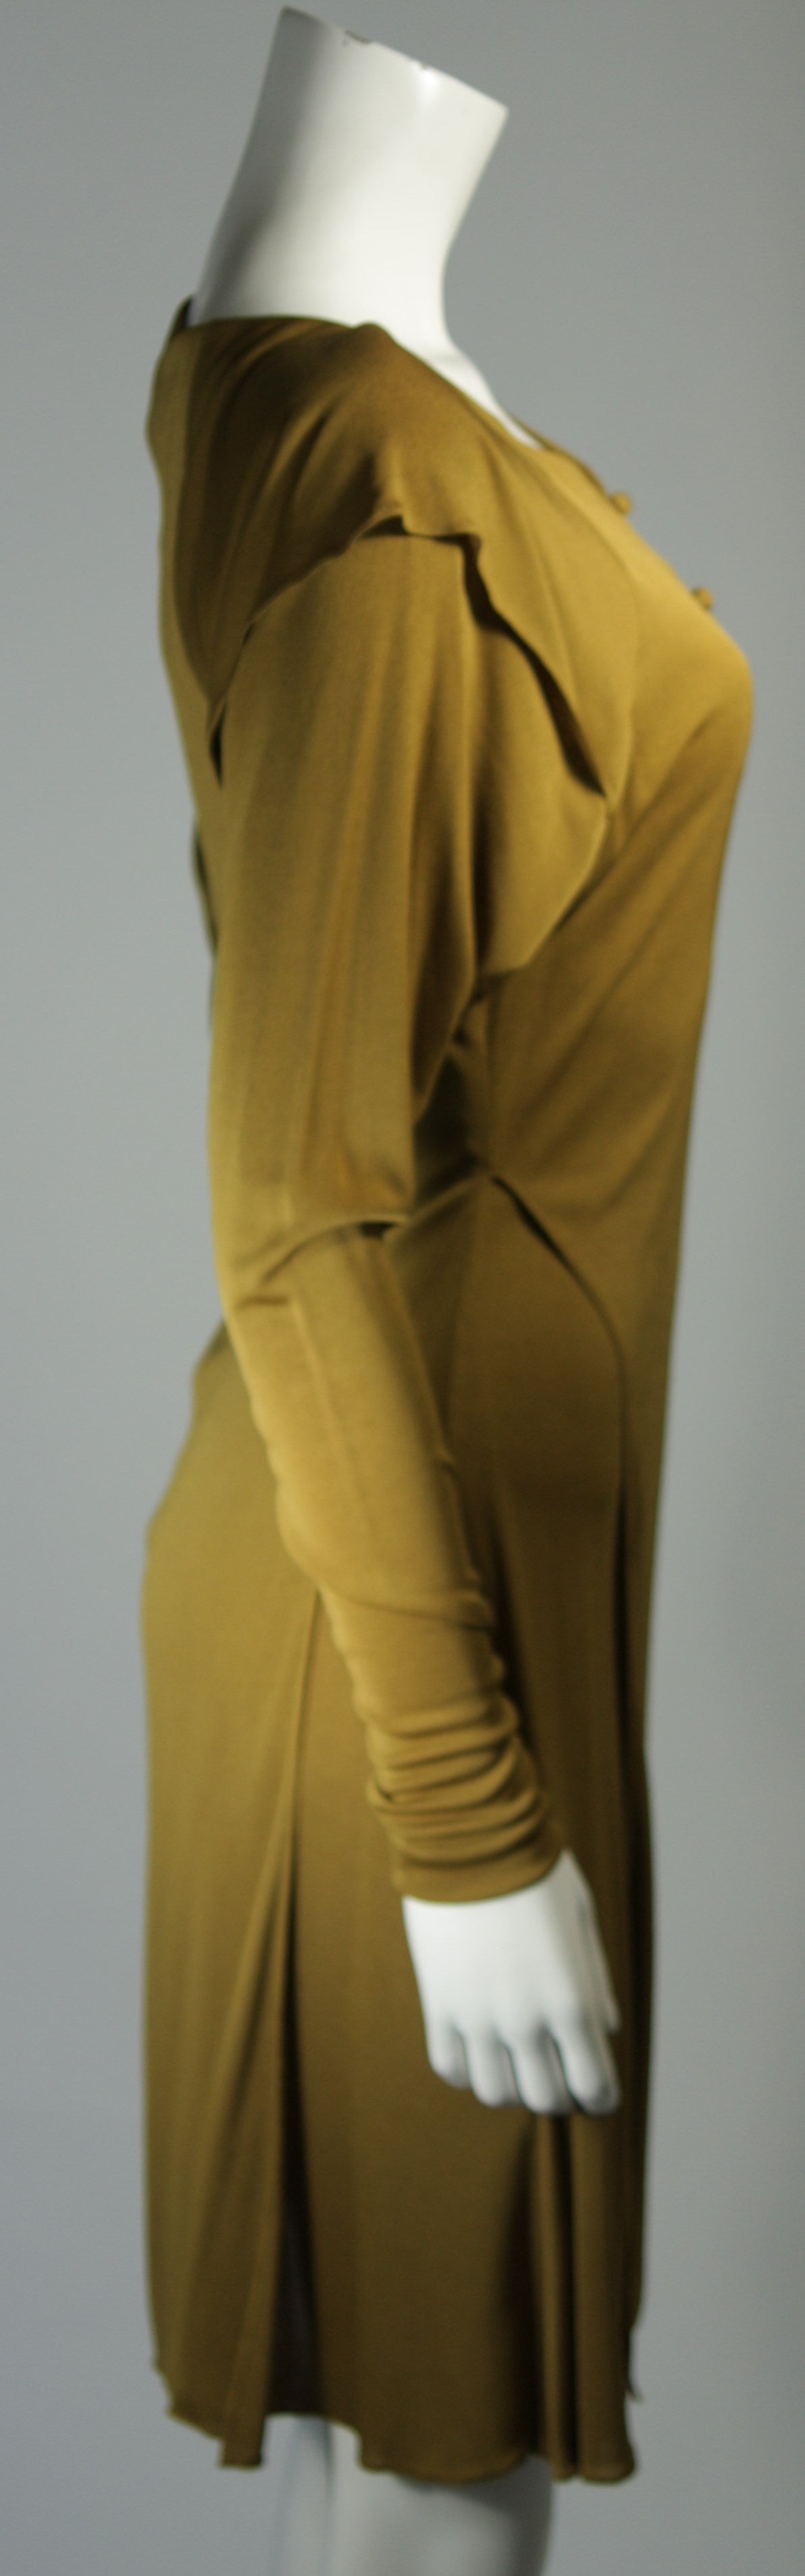 Holly Harp Curry Green Long Sleeve Jersey Dress Size Petite In Excellent Condition For Sale In Los Angeles, CA